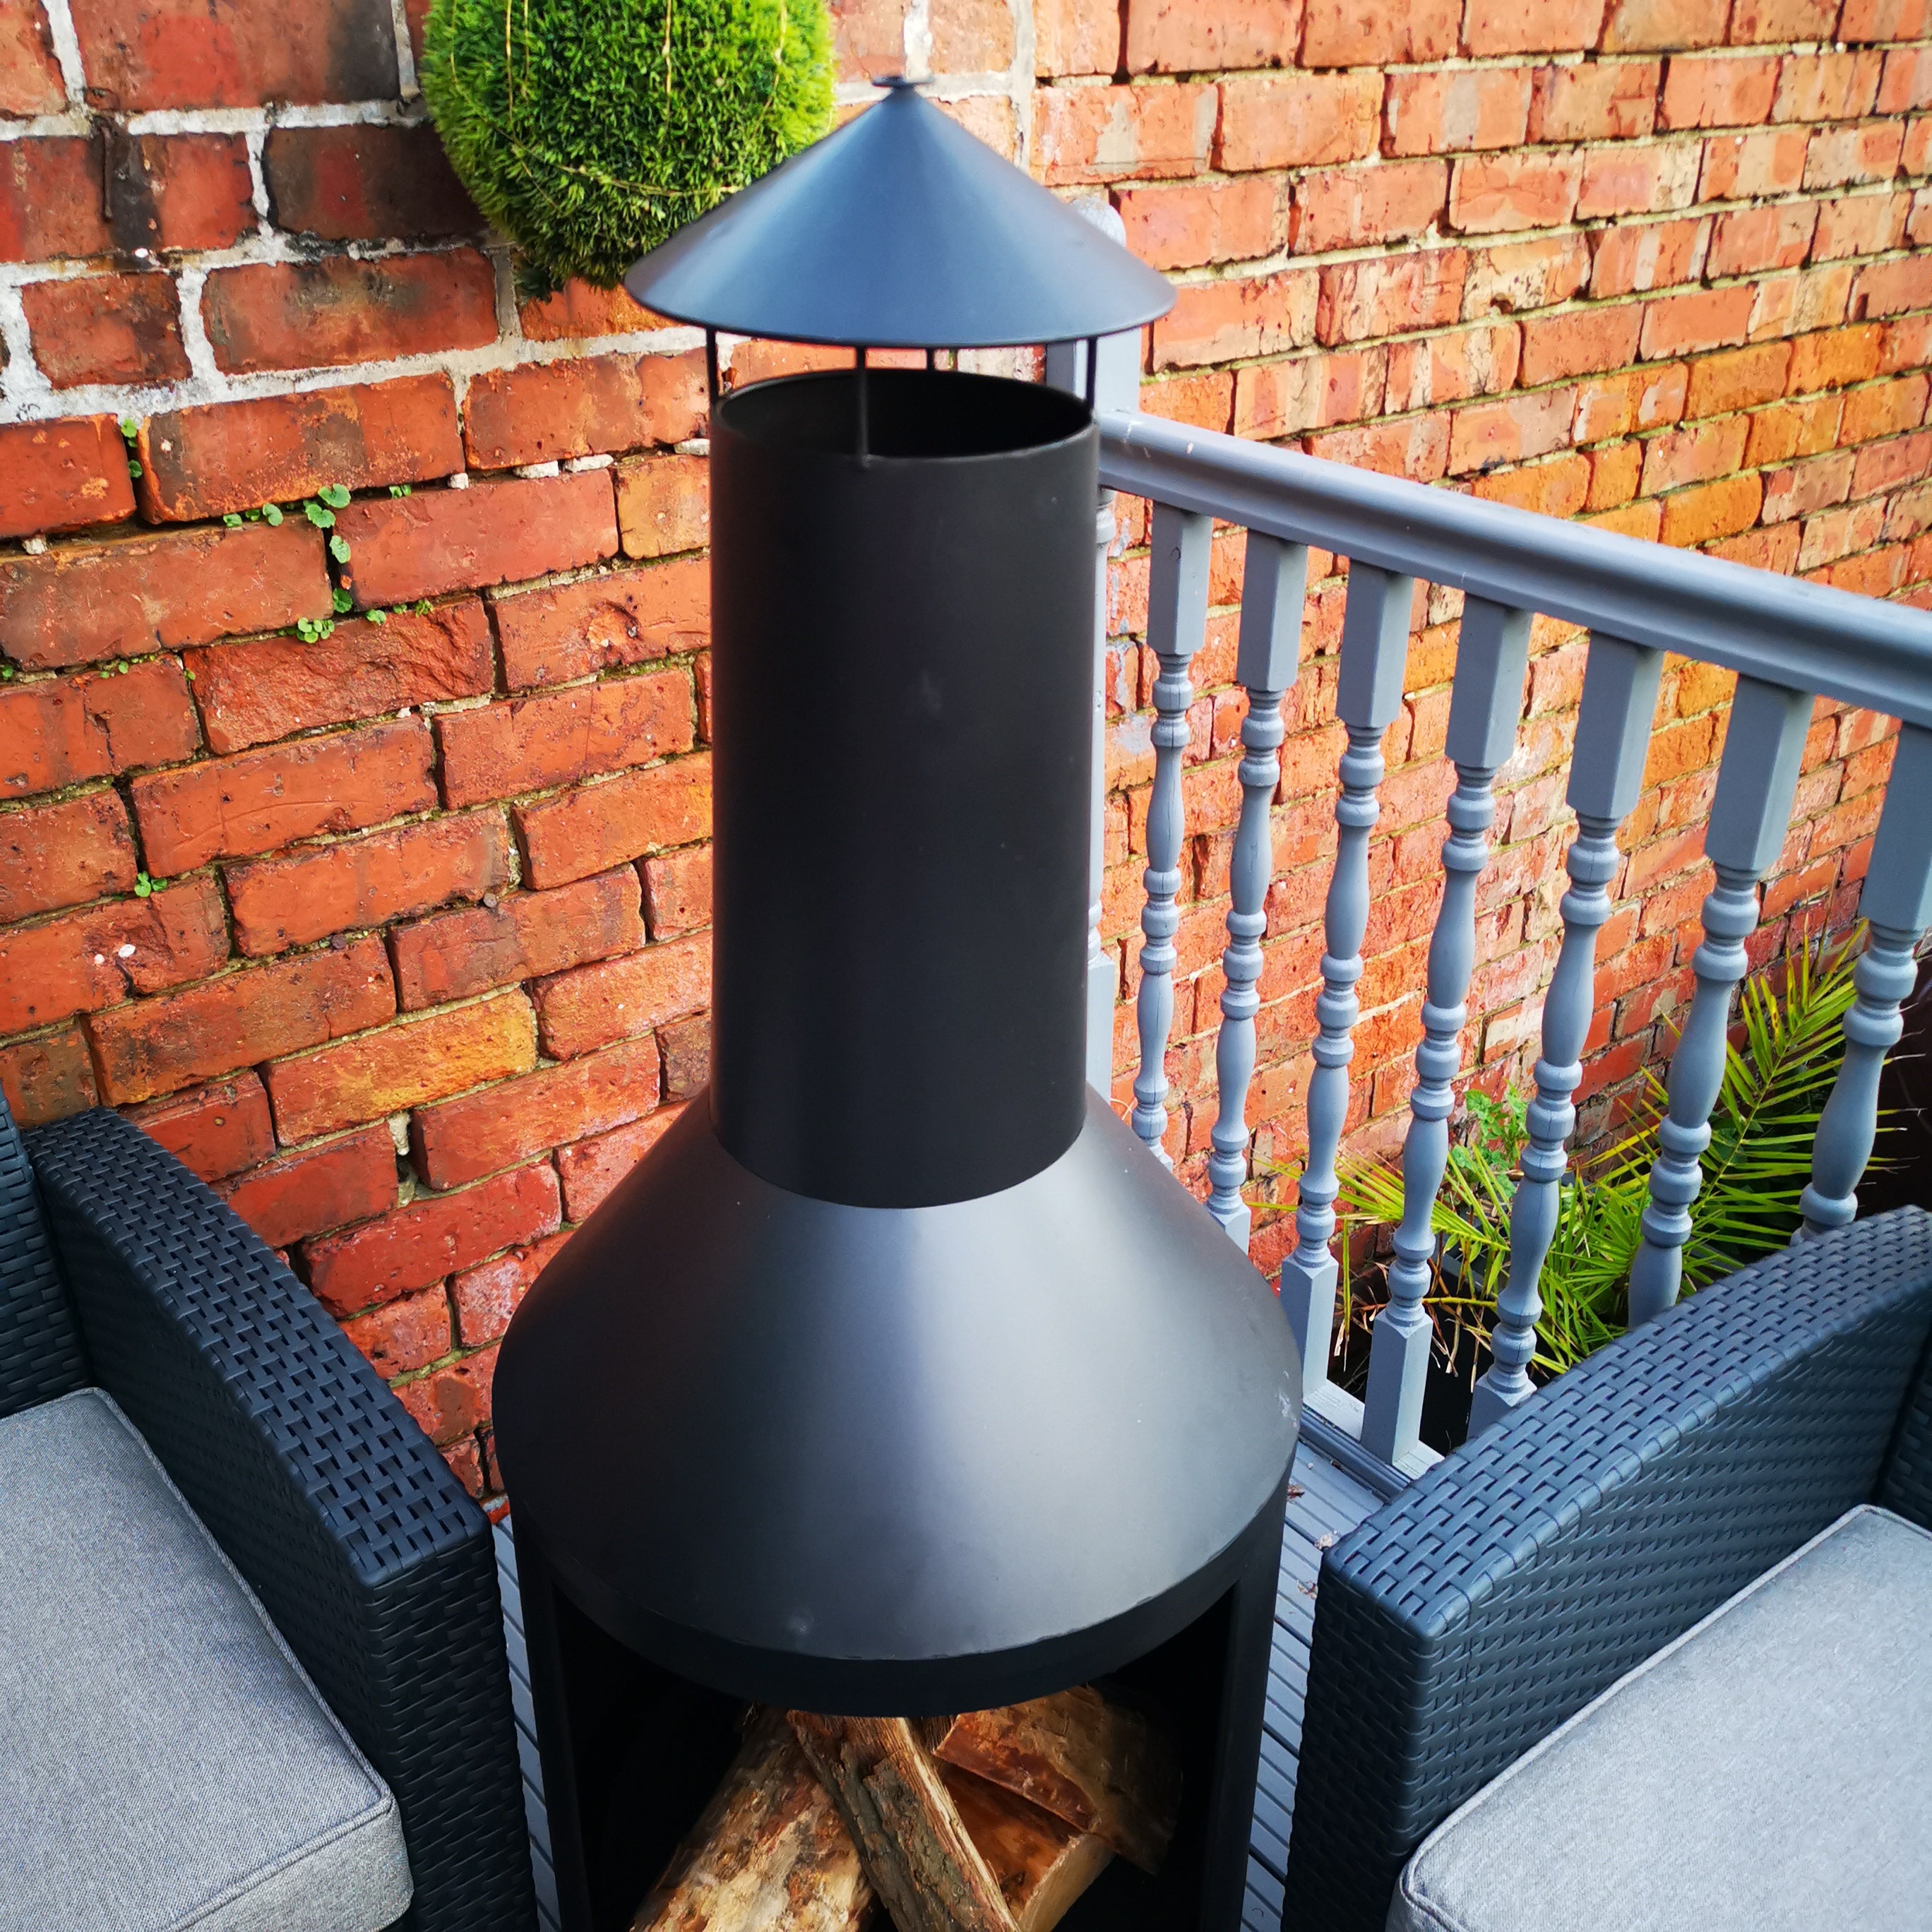 1.4m Tall Outdoor Garden Patio Chiminea Log Burner Fire Pit with Log Store & Cover